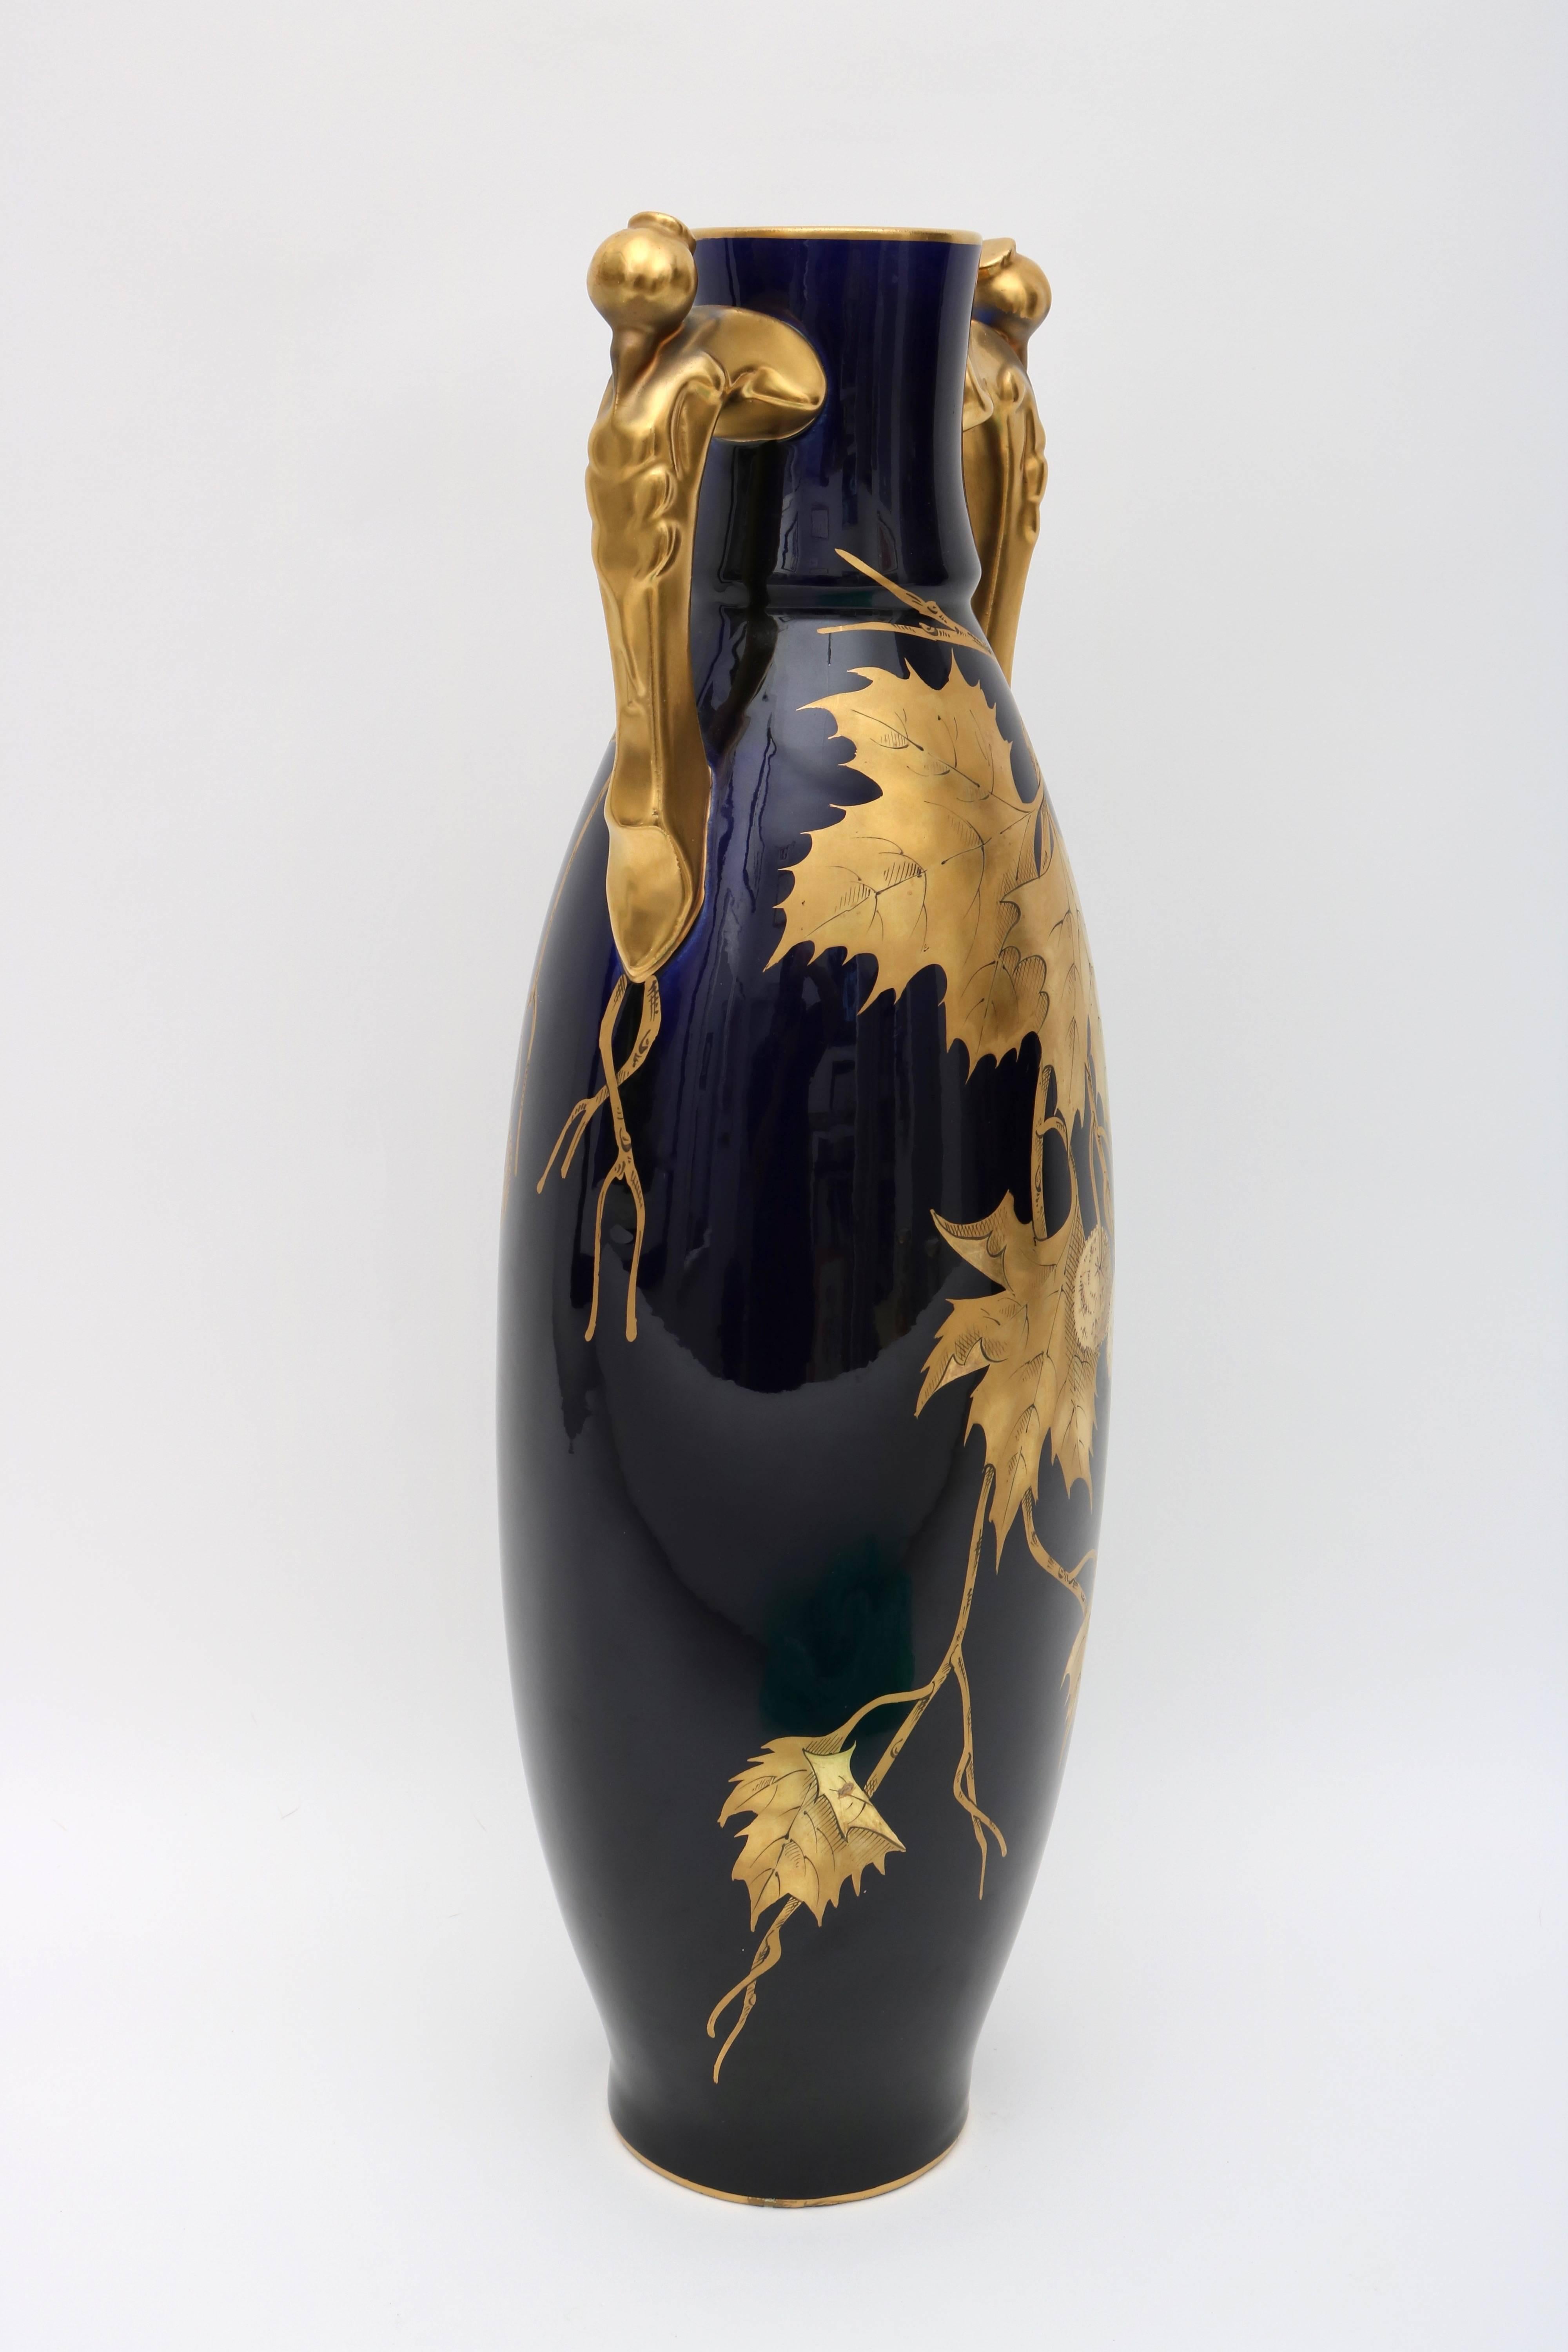 Art Nouveau Porcelain Vase by Gustave Asch in Cobalt Blue and Gold, circa 1900 For Sale